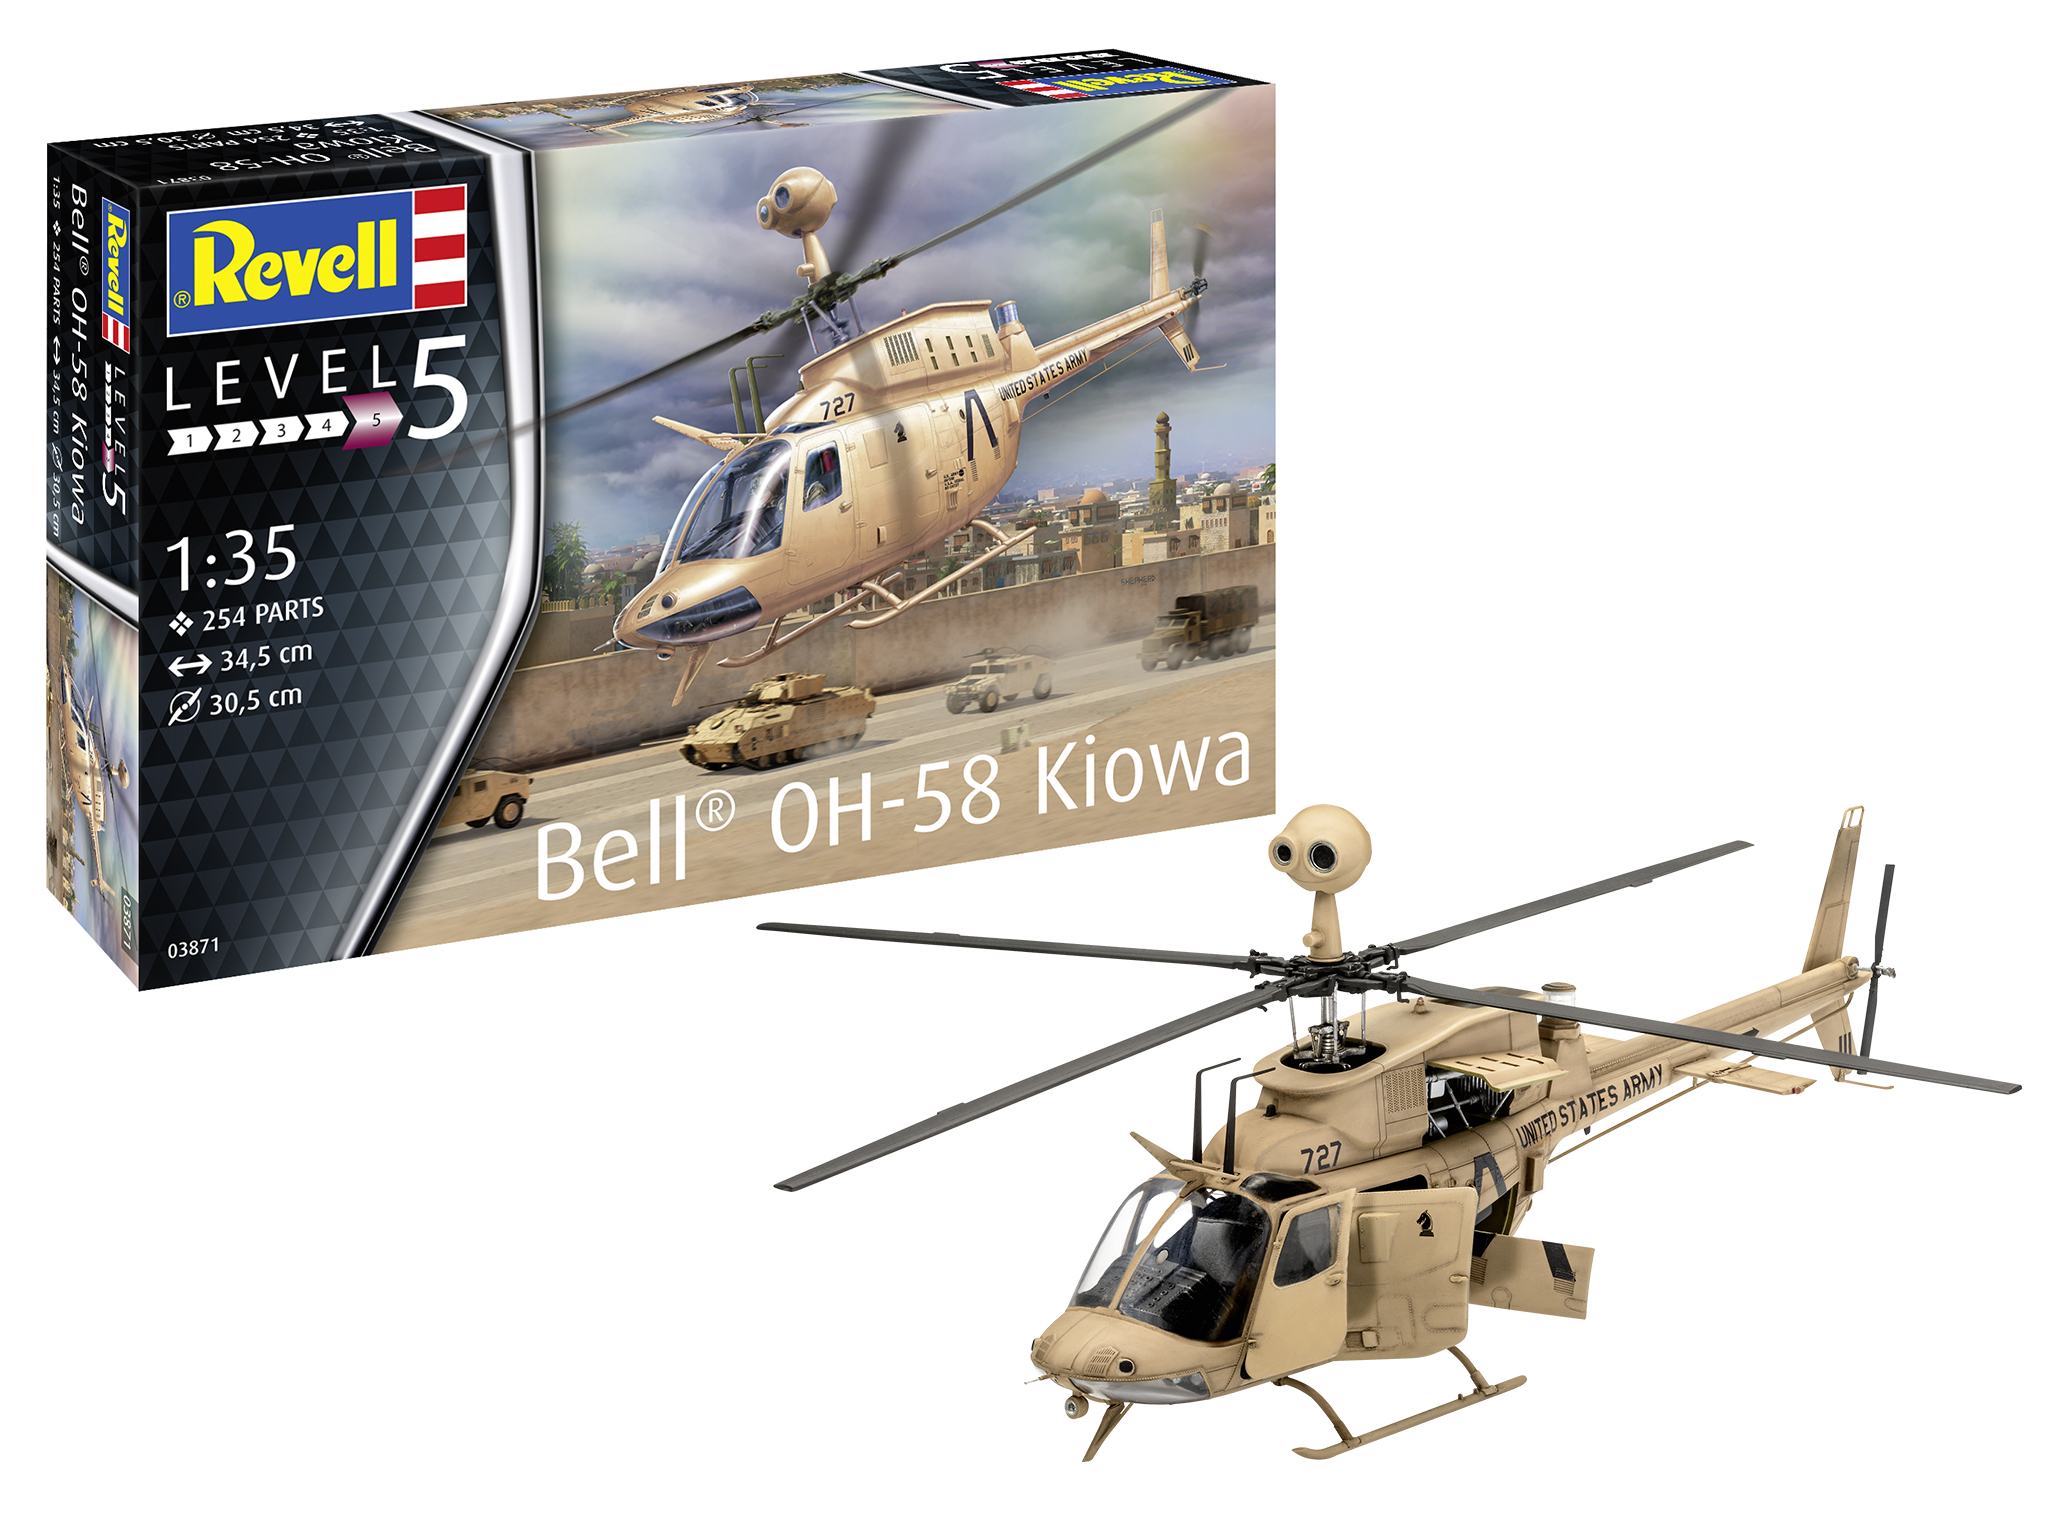 revell-03871-Bell-OH-58-Kiowa-Helicopter